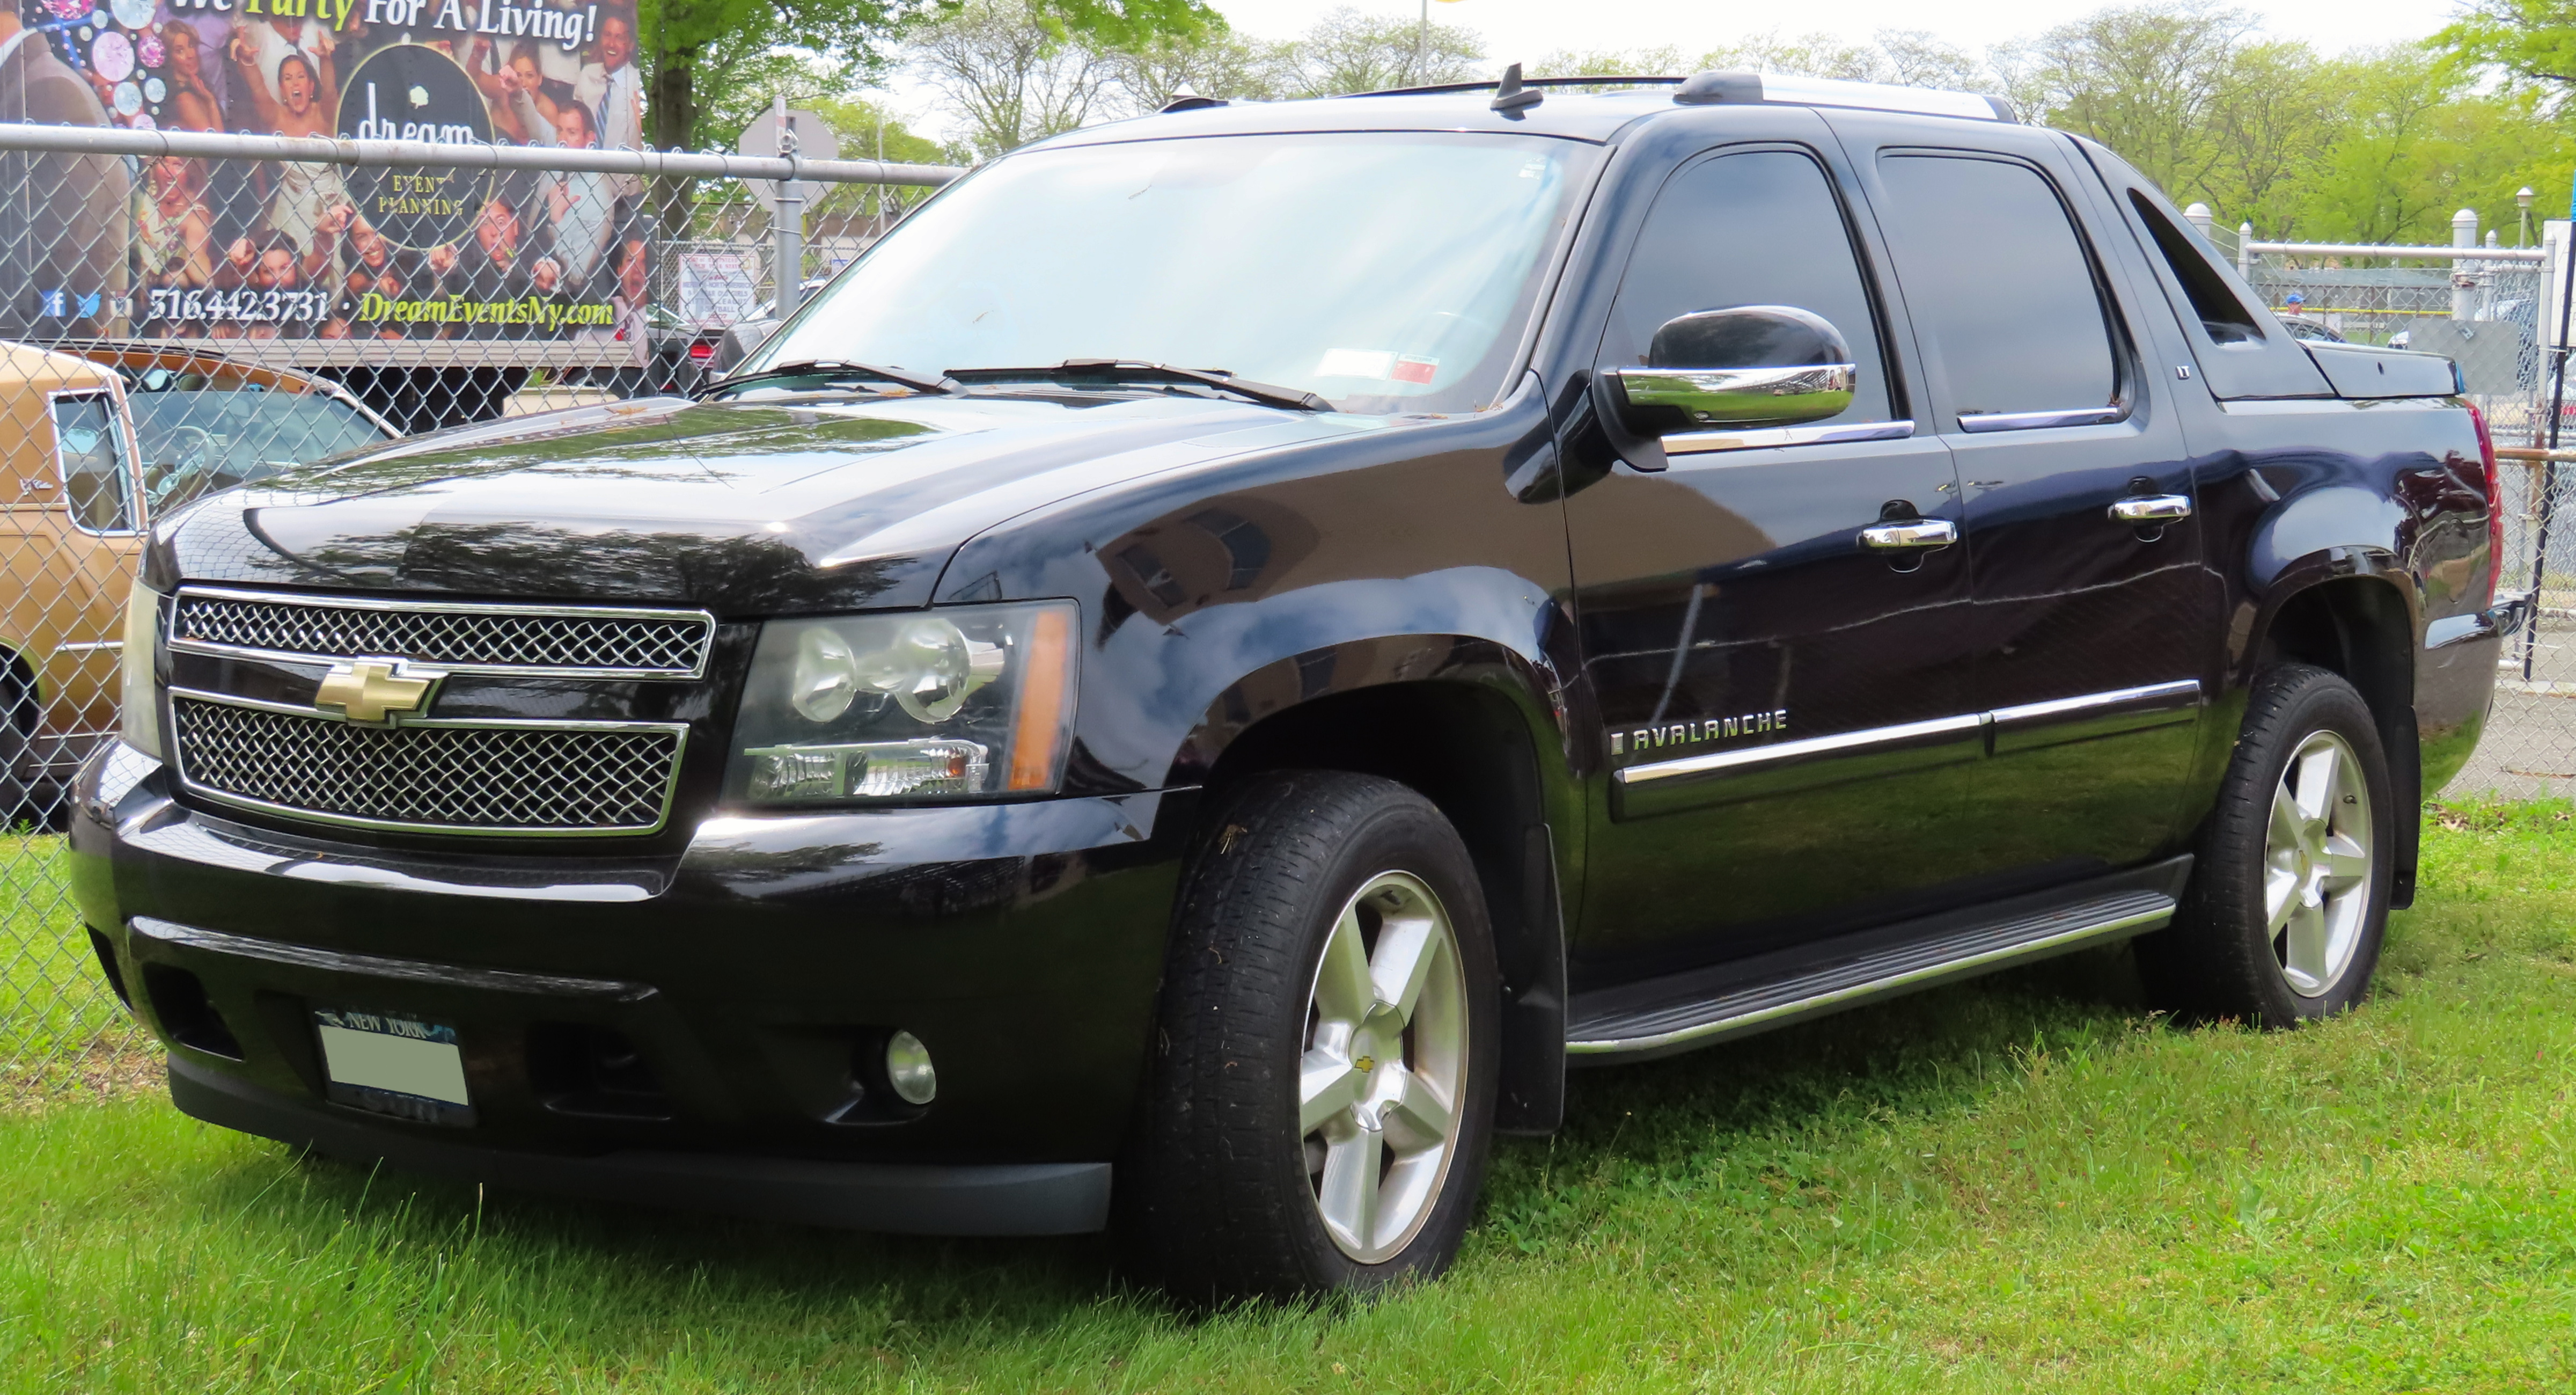 Black Chevy Avalanche parked on grass